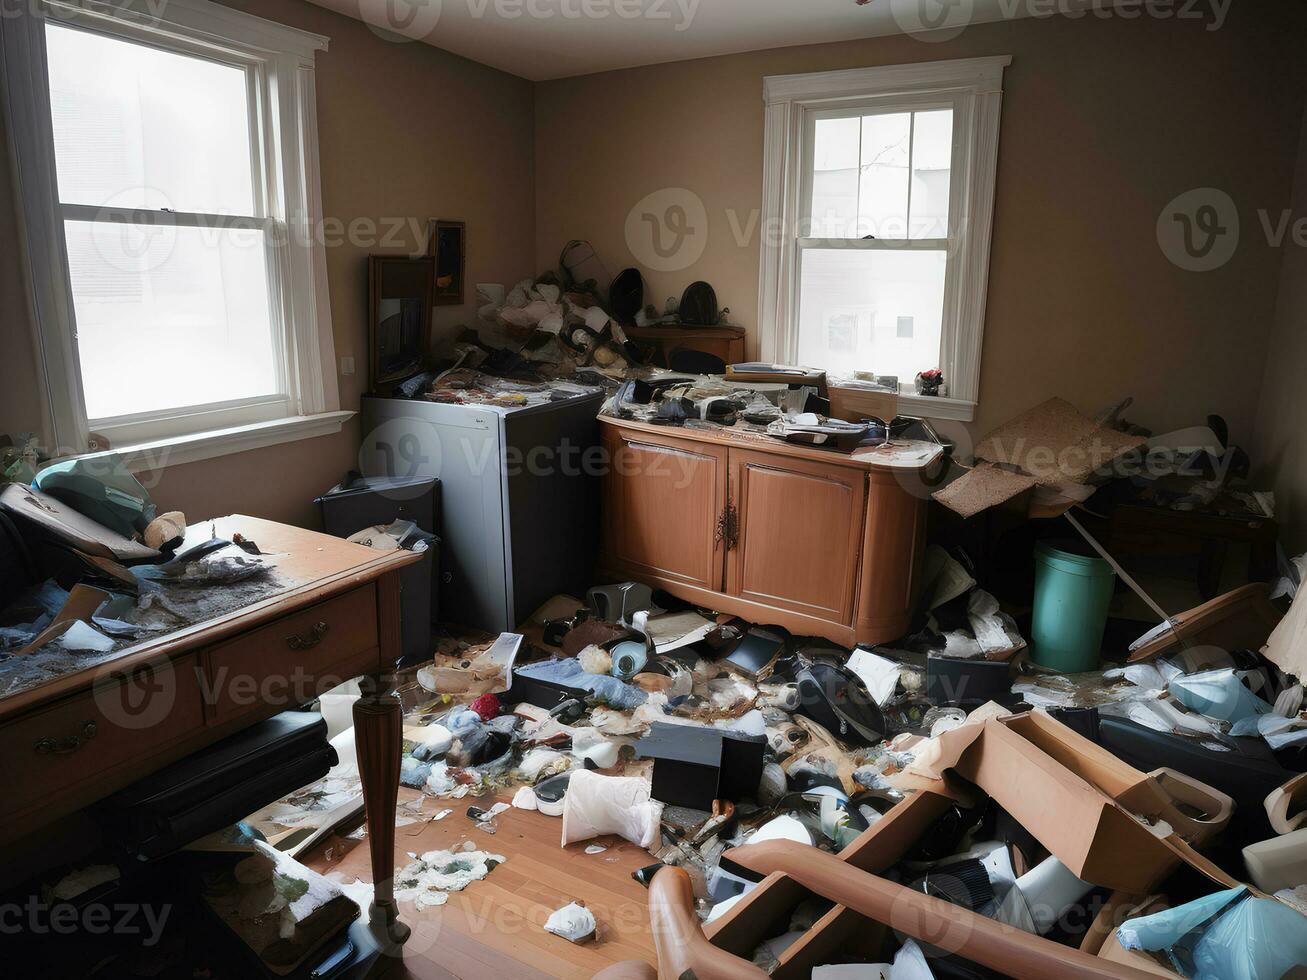 Photograph of a cluttered living space filled with trash debris broken furniture photo